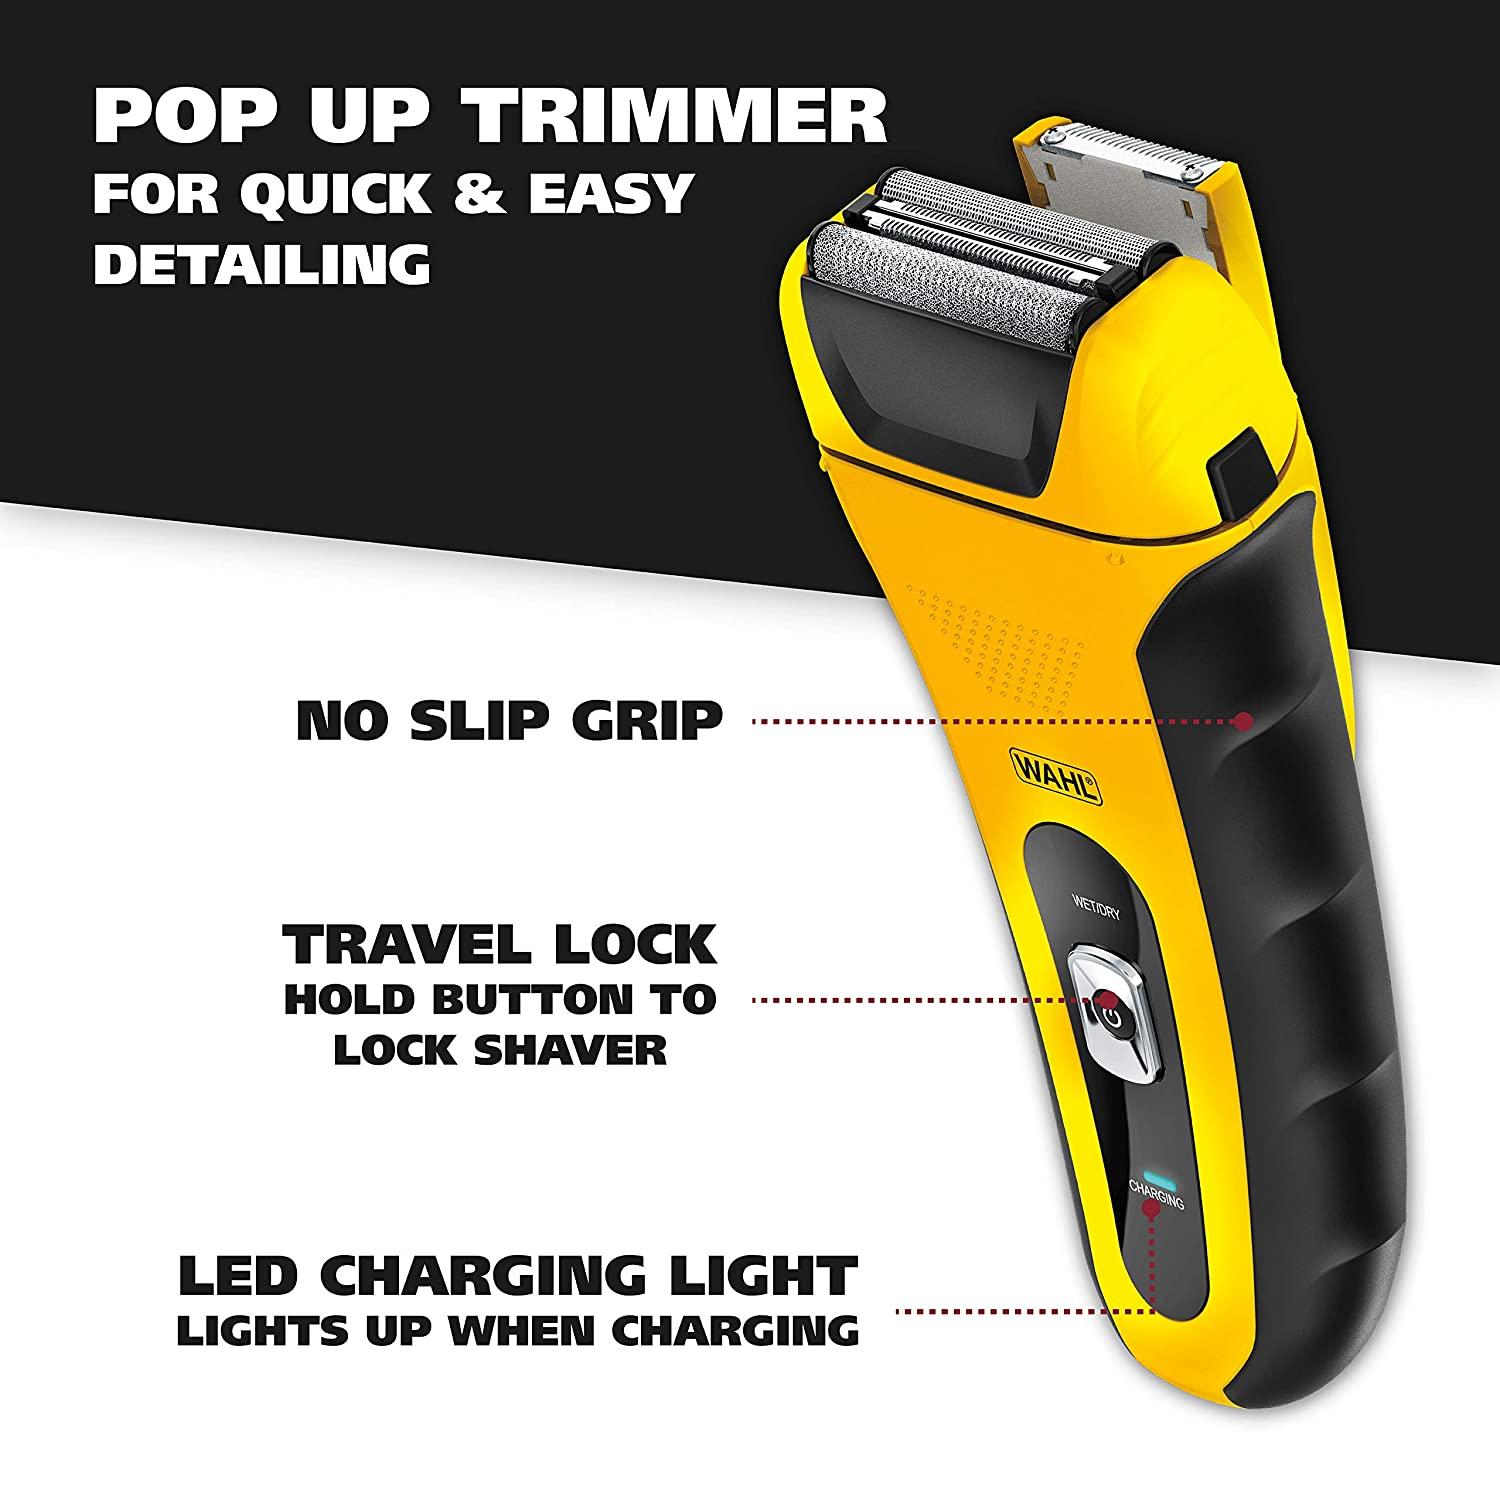 Lifeproof Lithium Ion Wet/Dry Trimmer